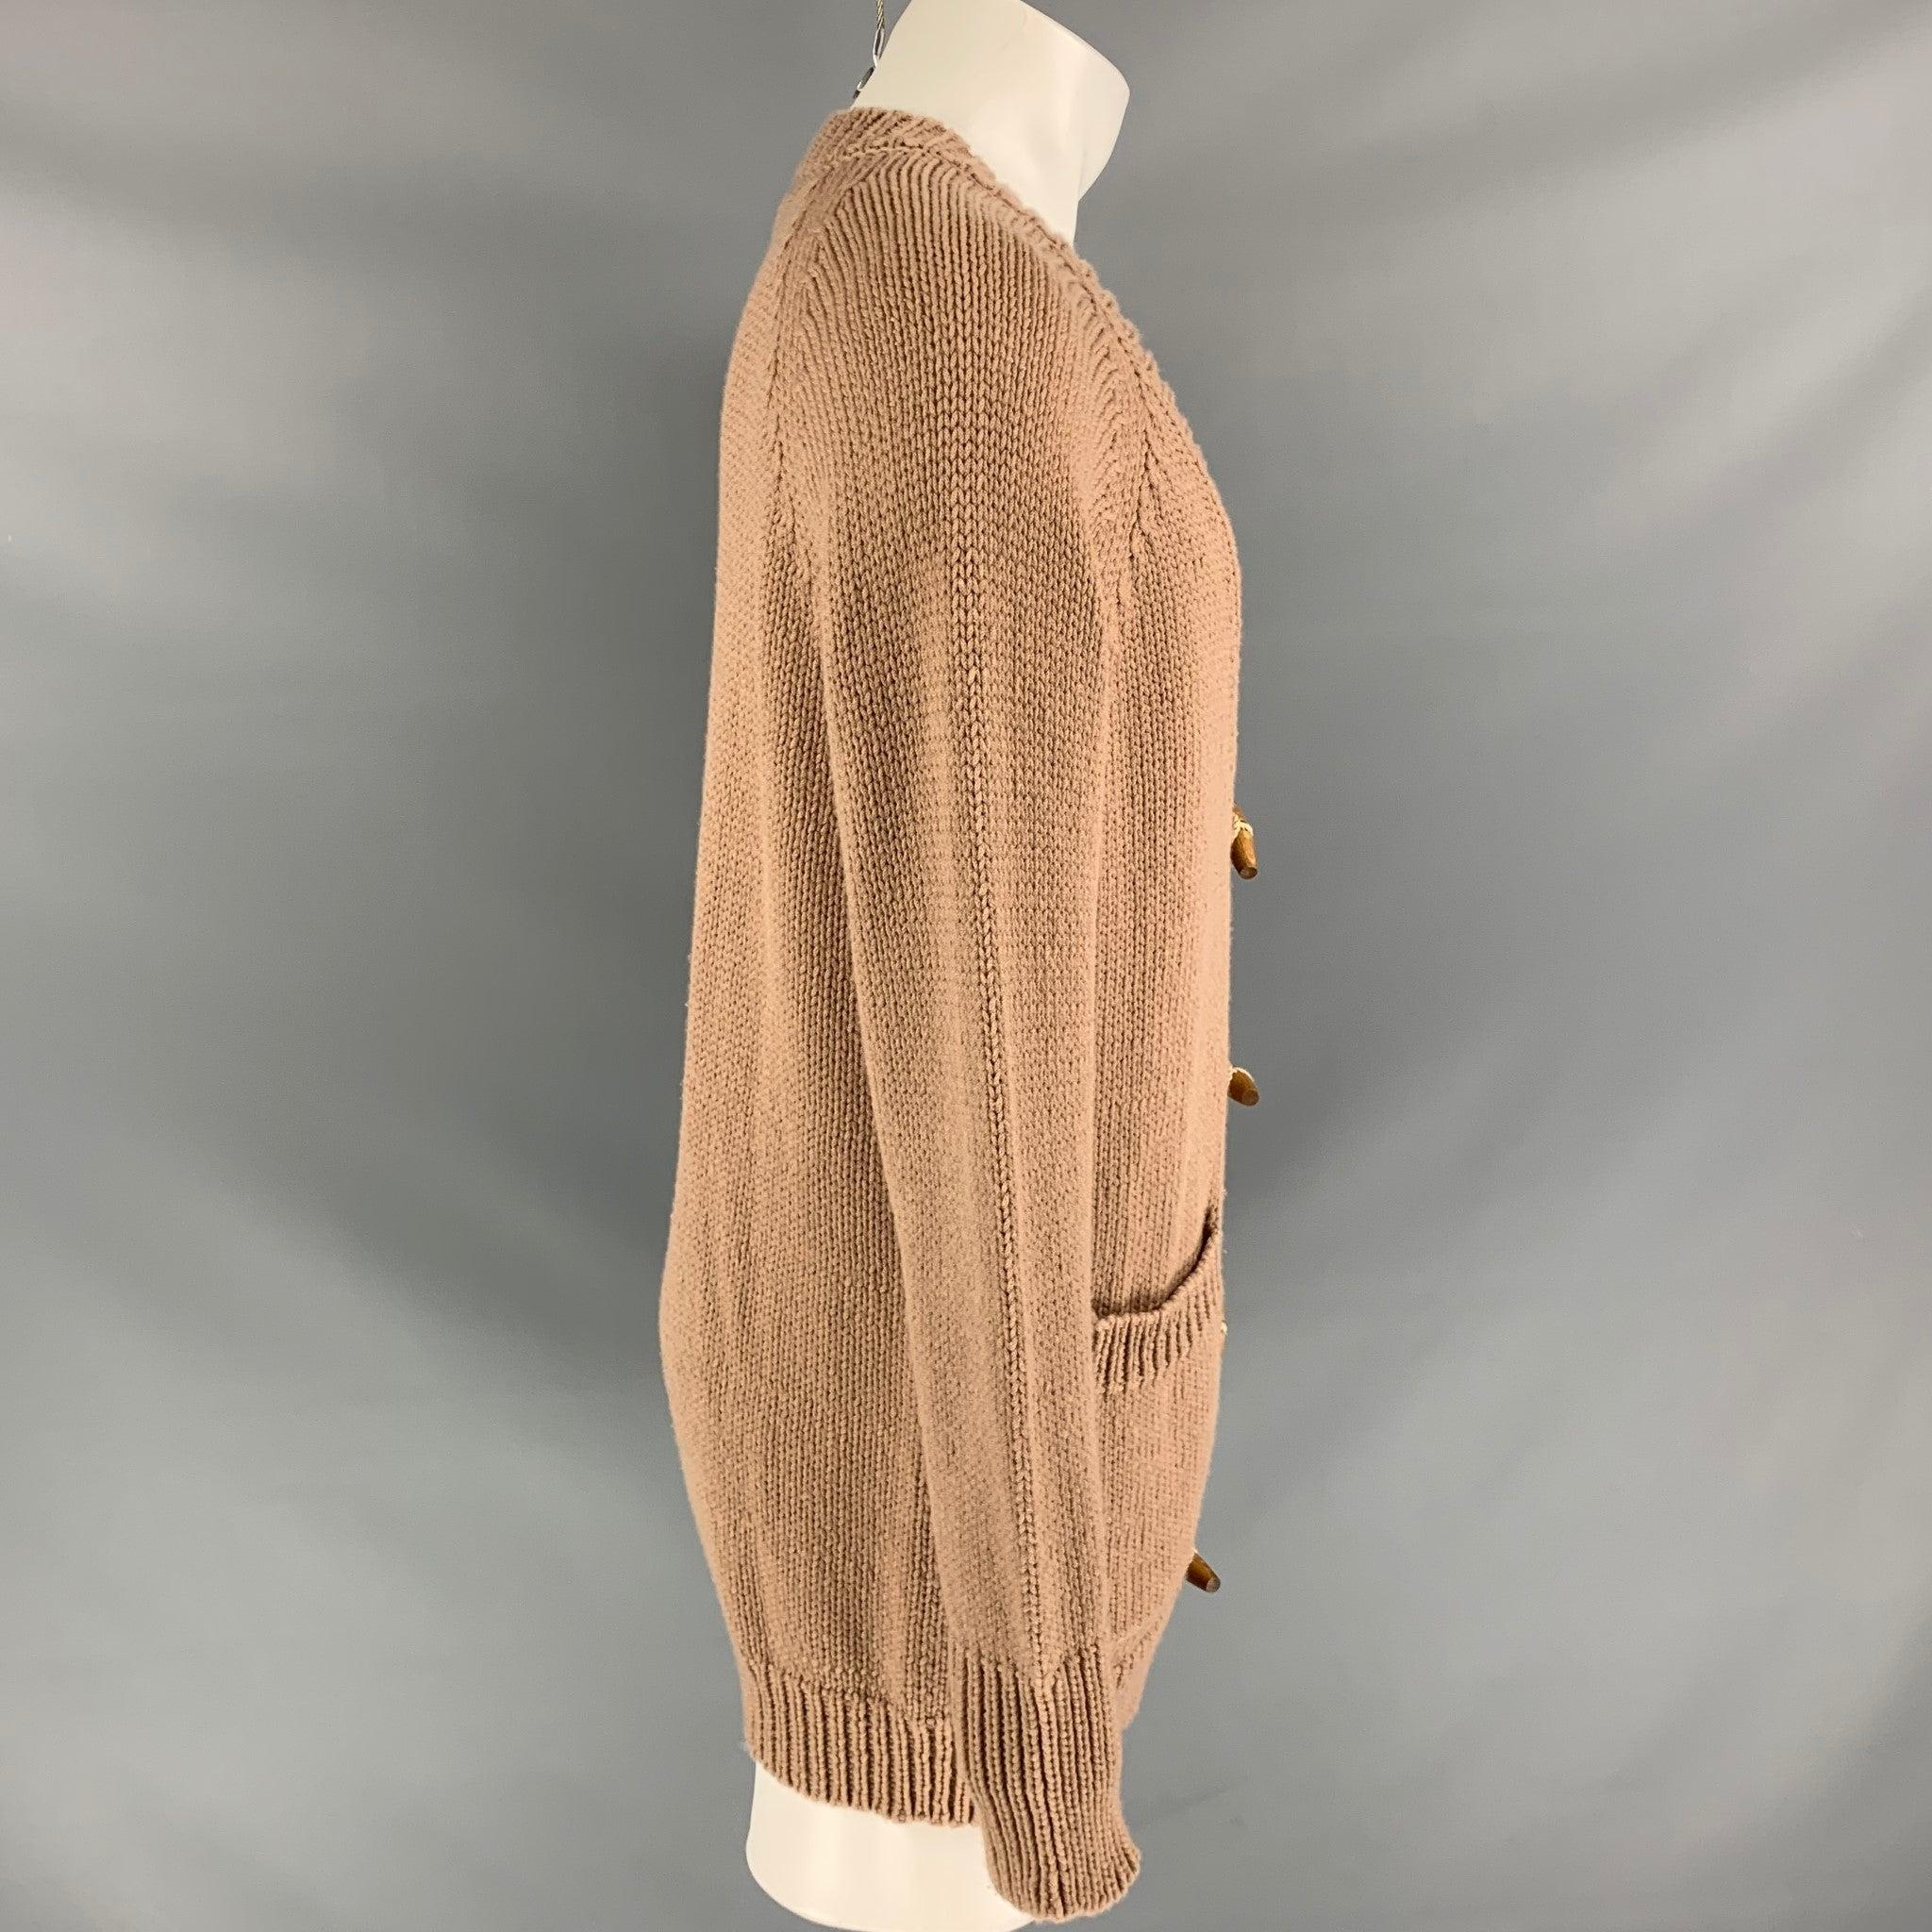 BURBERRY PRORSUM Spring 2015 Size M Tan Cashmere Patch Pocket Cardigan Sweater In Excellent Condition For Sale In San Francisco, CA